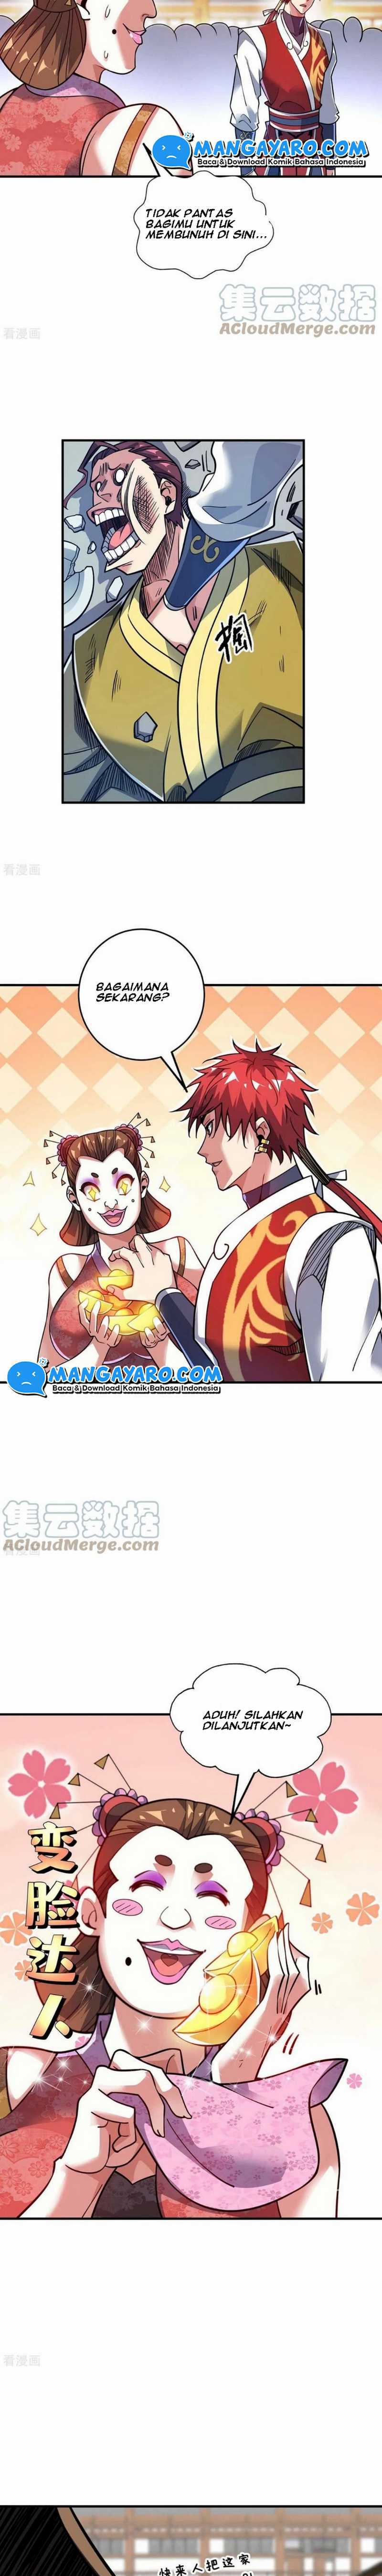 The First Son-in-law Vanguard Of All Time Chapter 161